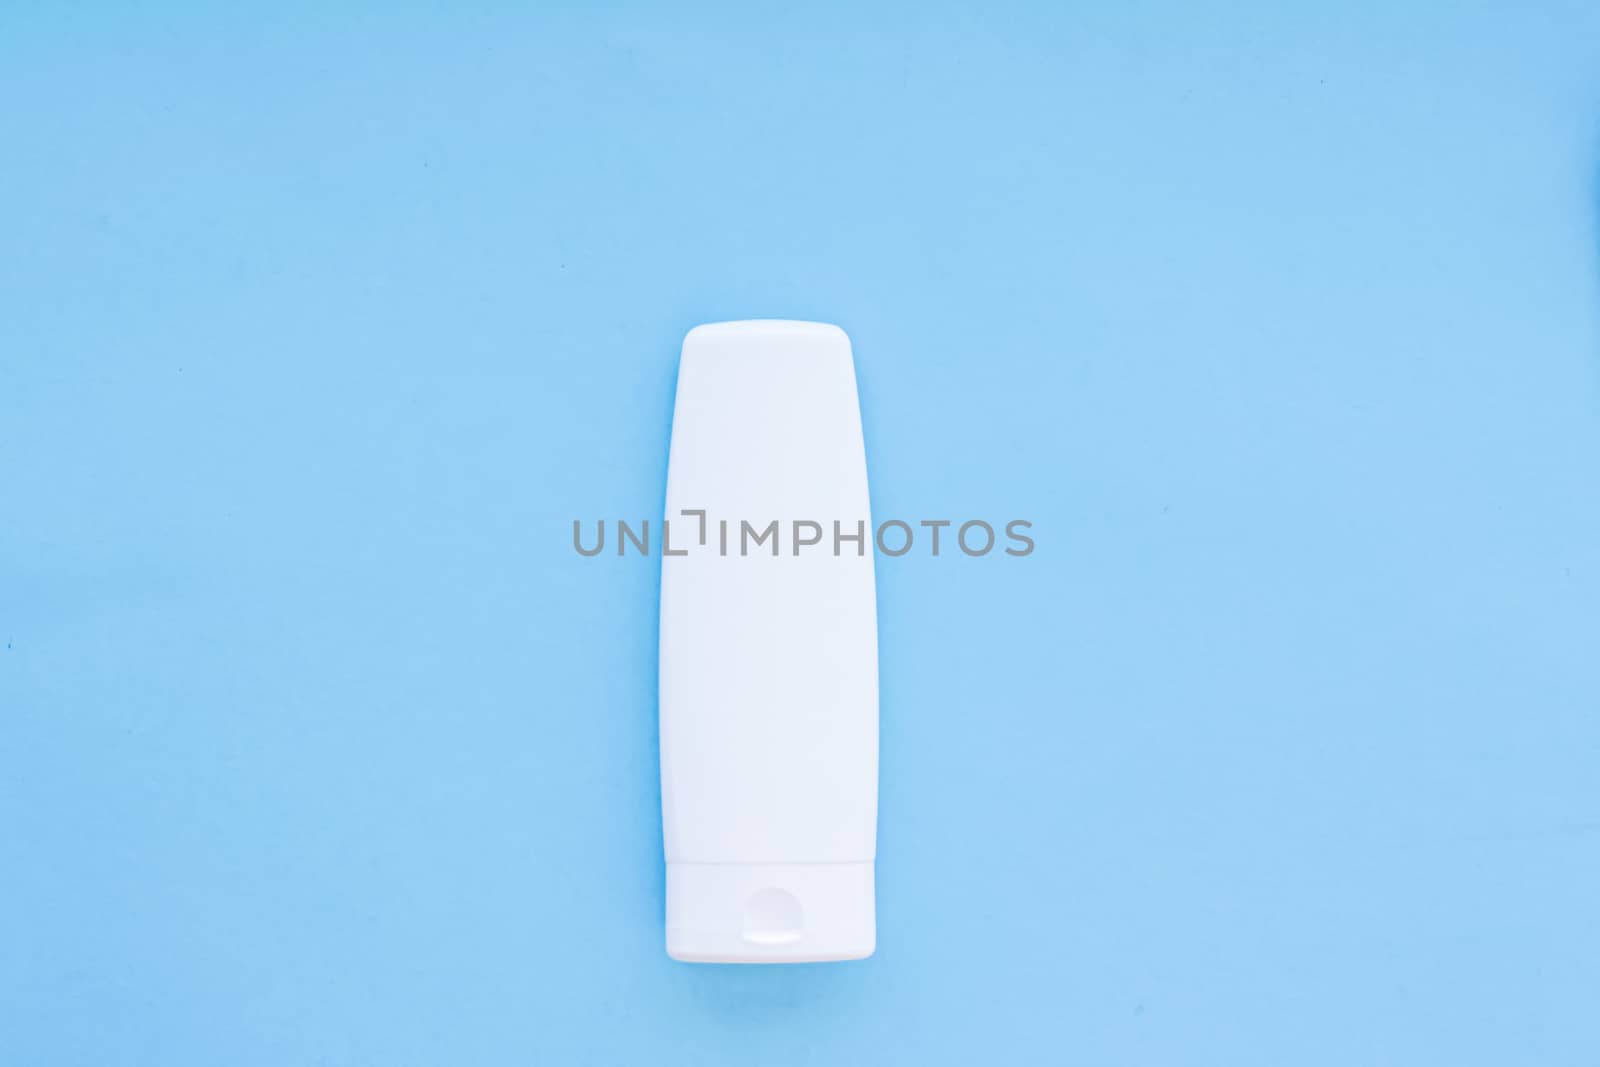 Blank label cosmetic container bottle as product mockup on blue background, hygiene and healthcare